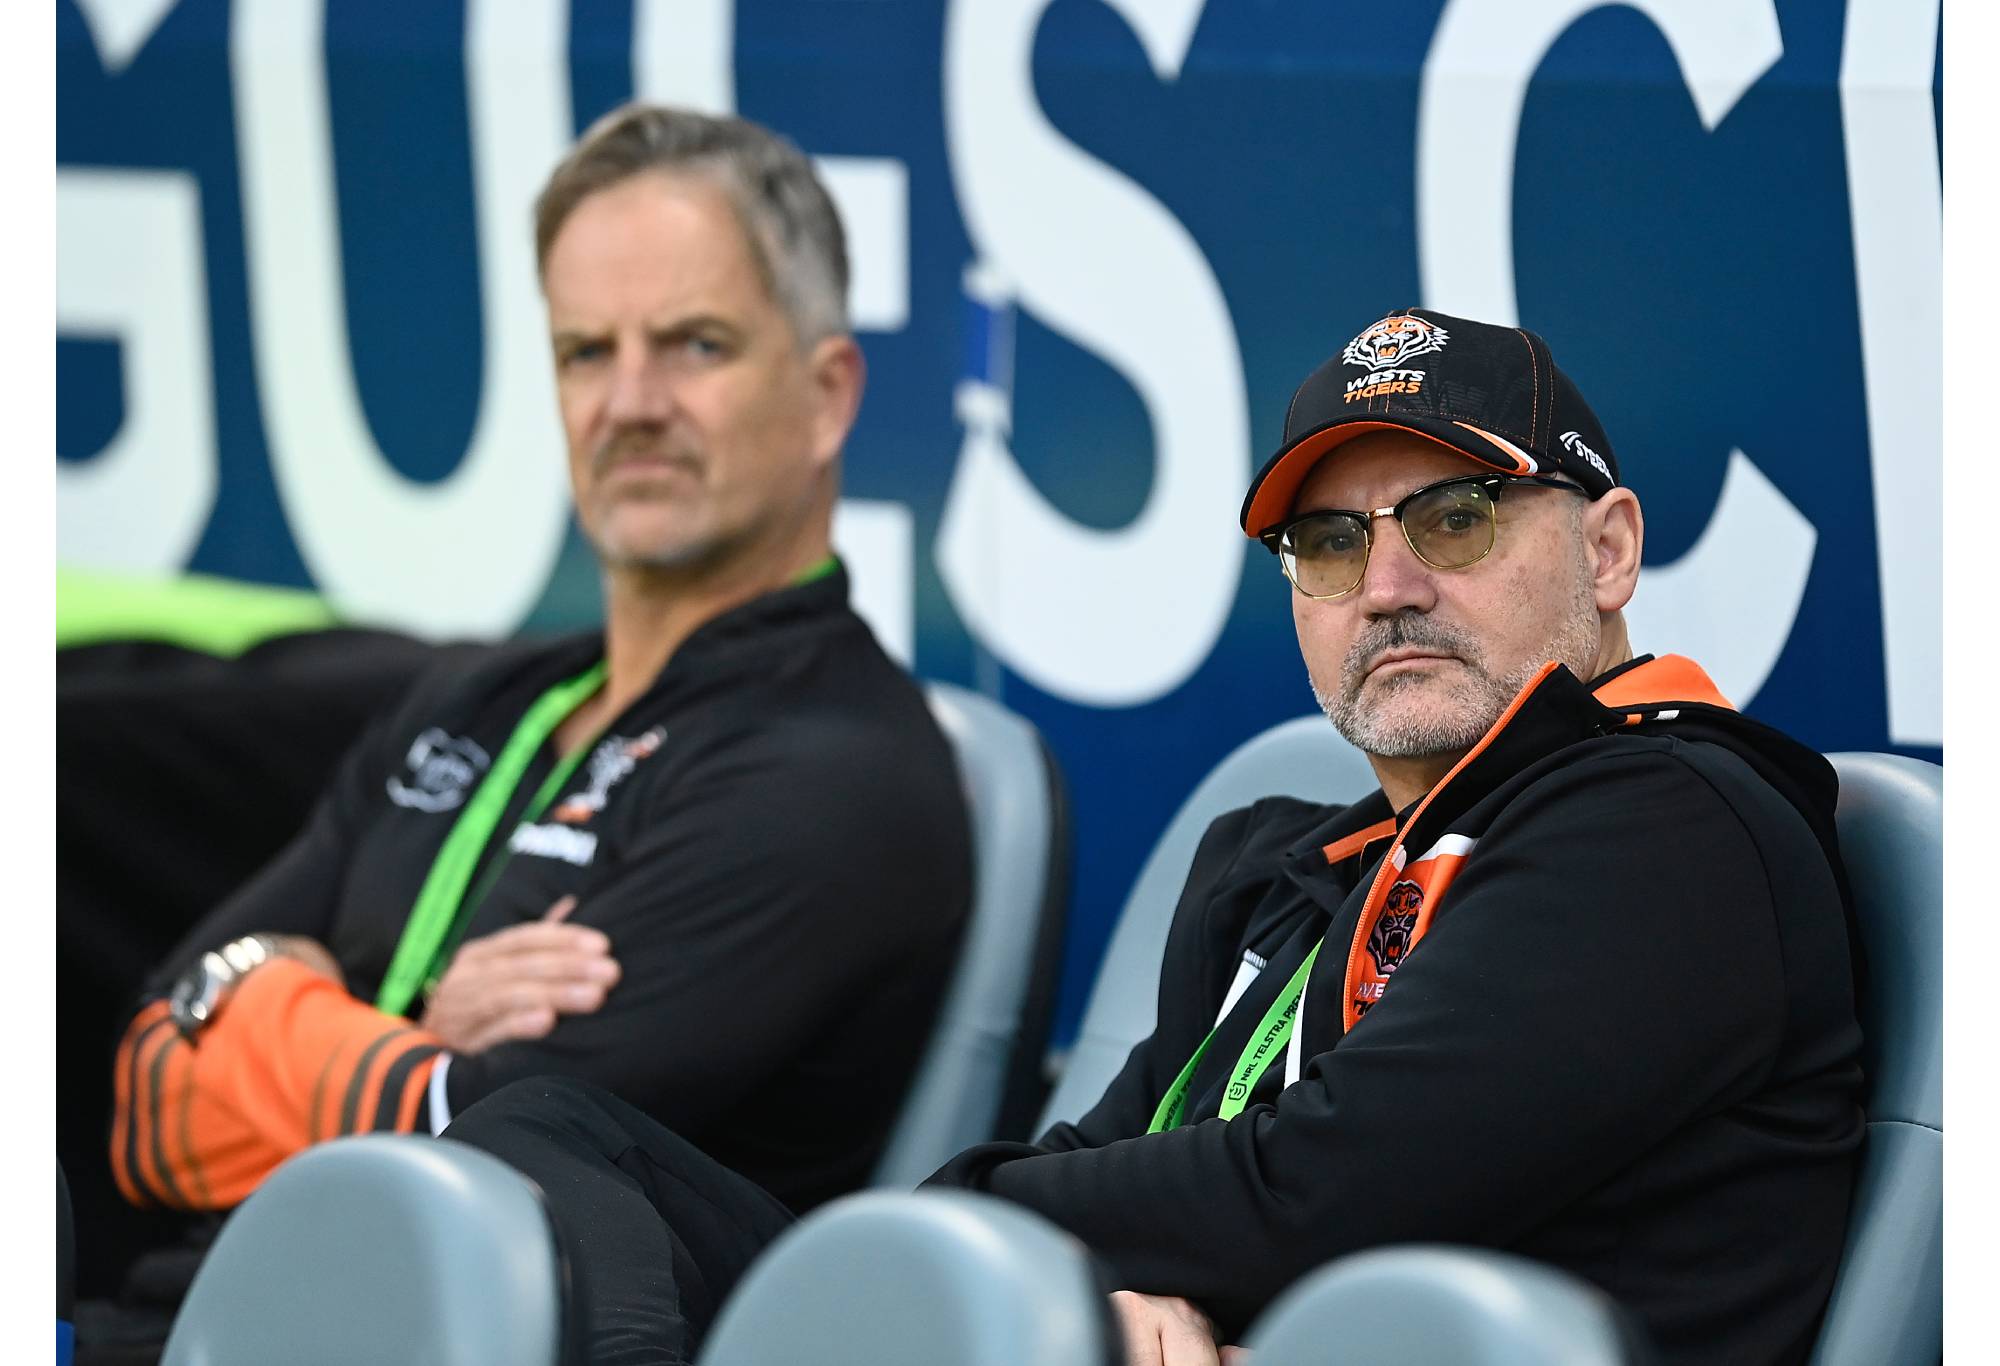 TOWNSVILLE, AUSTRALIA - JULY 01: West Tigers Board Director Lee Hagipantelis and CEO Justin Pascoe look on before the start of the round 18 NRL match between North Queensland Cowboys and Wests Tigers at Qld Country Bank Stadium on July 01, 2023 in Townsville, Australia. (Photo by Ian Hitchcock/Getty Images)